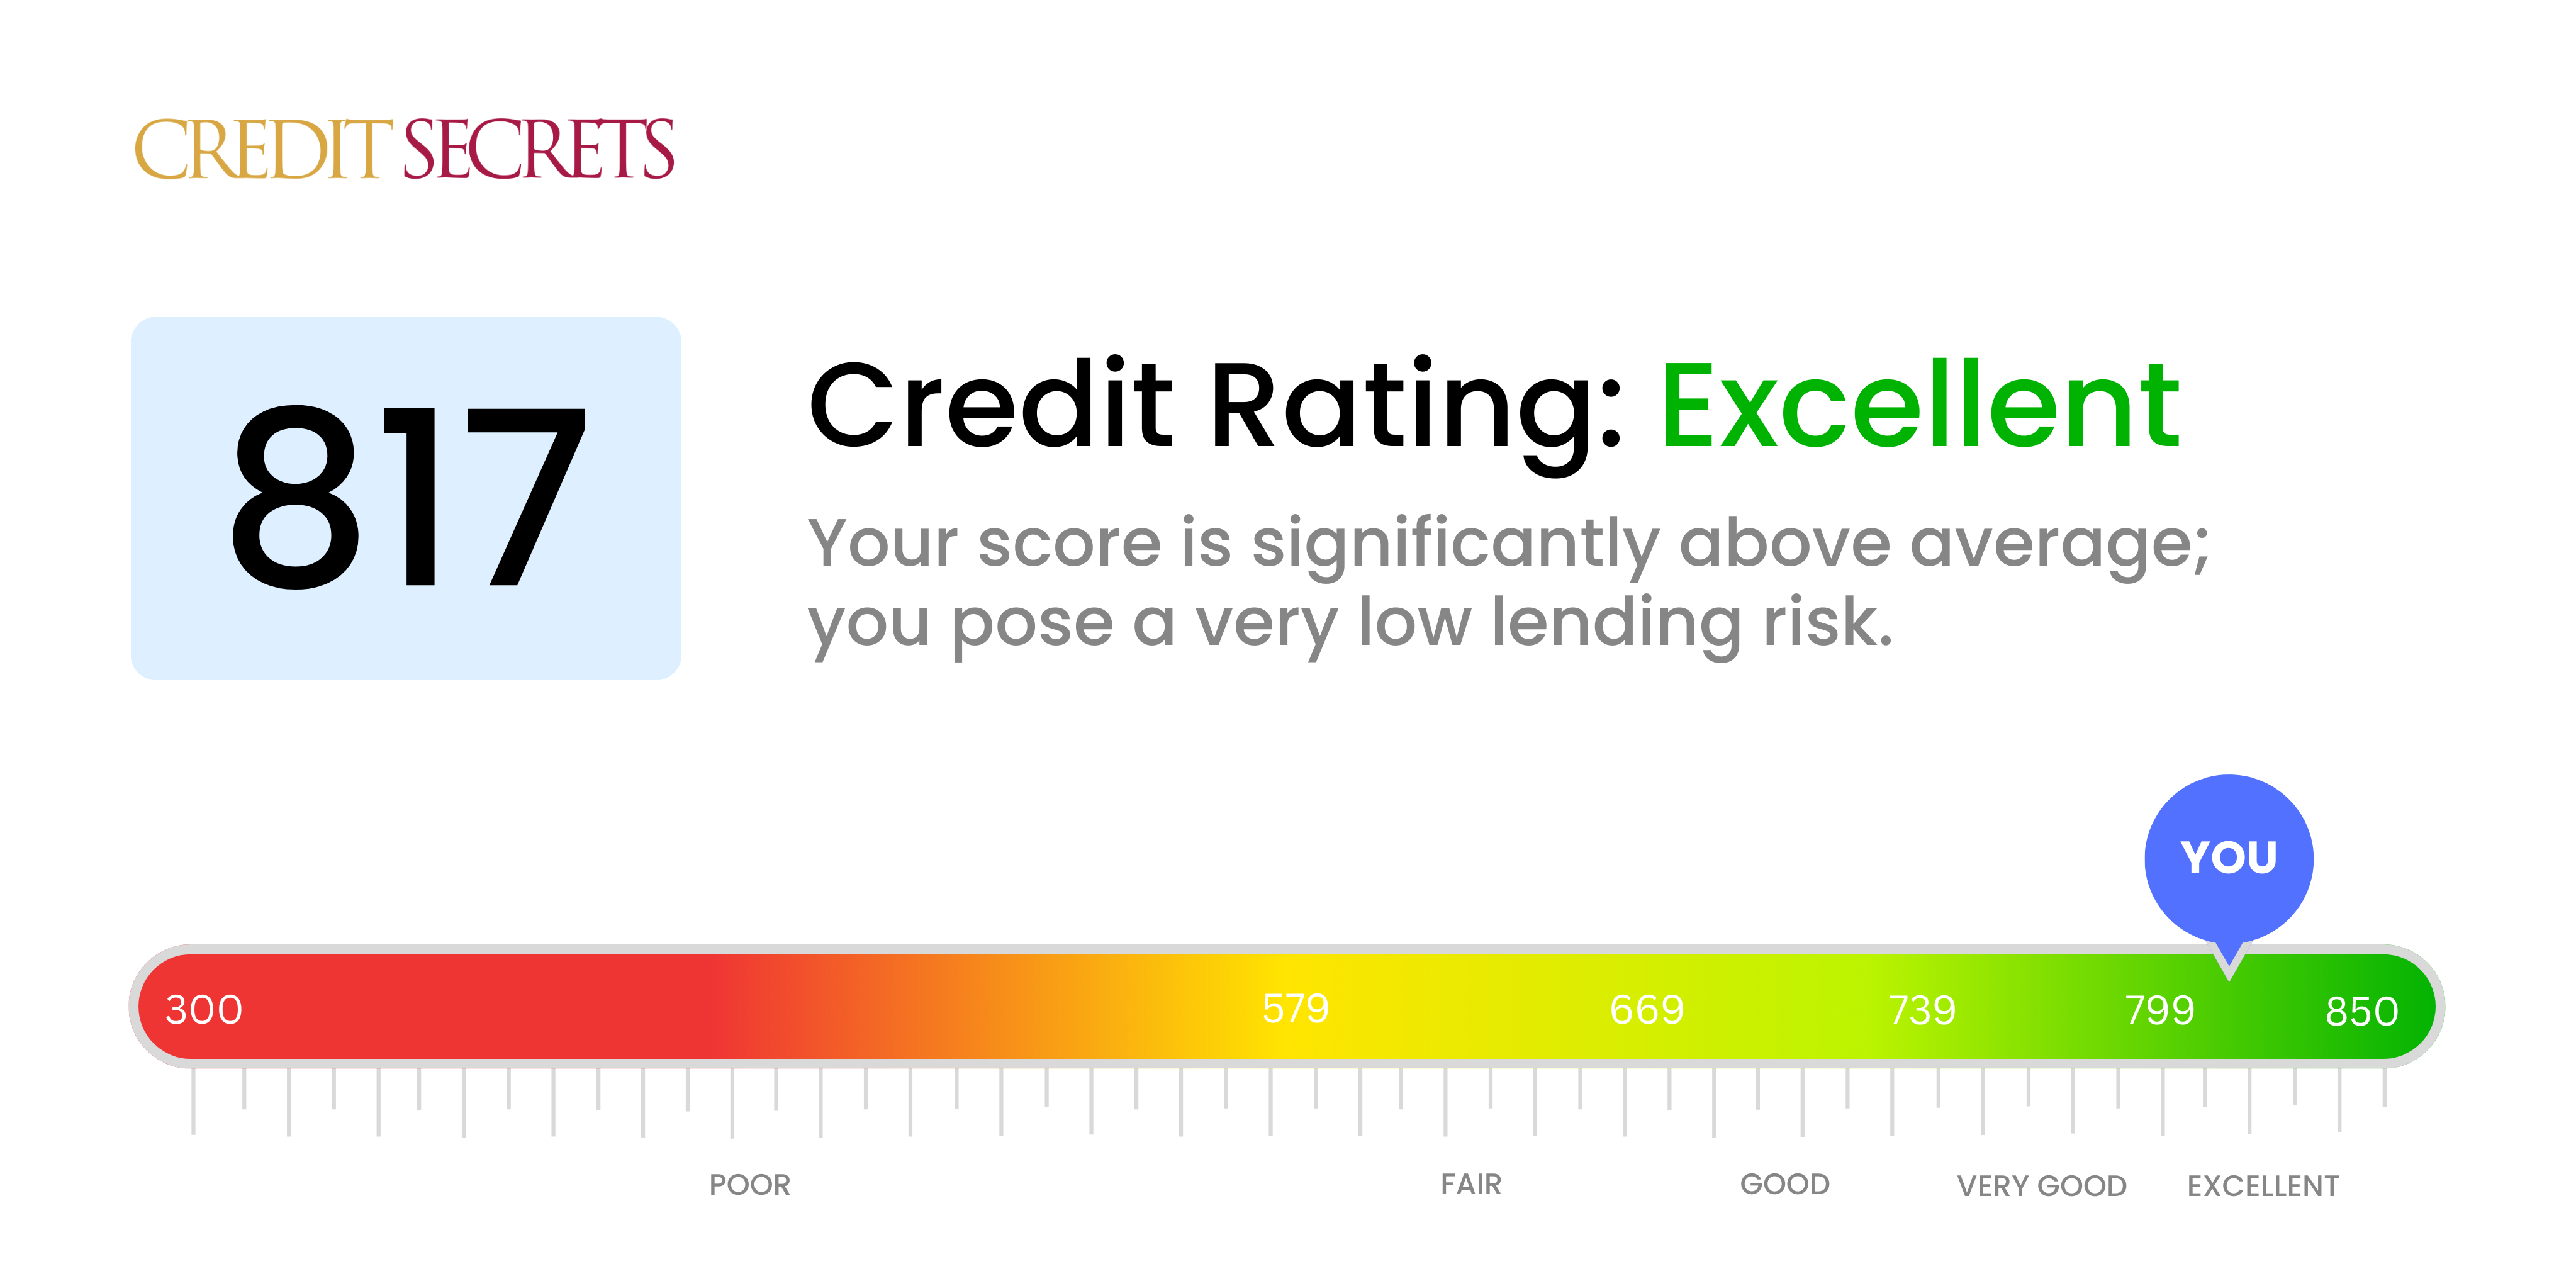 Is 817 a good credit score?